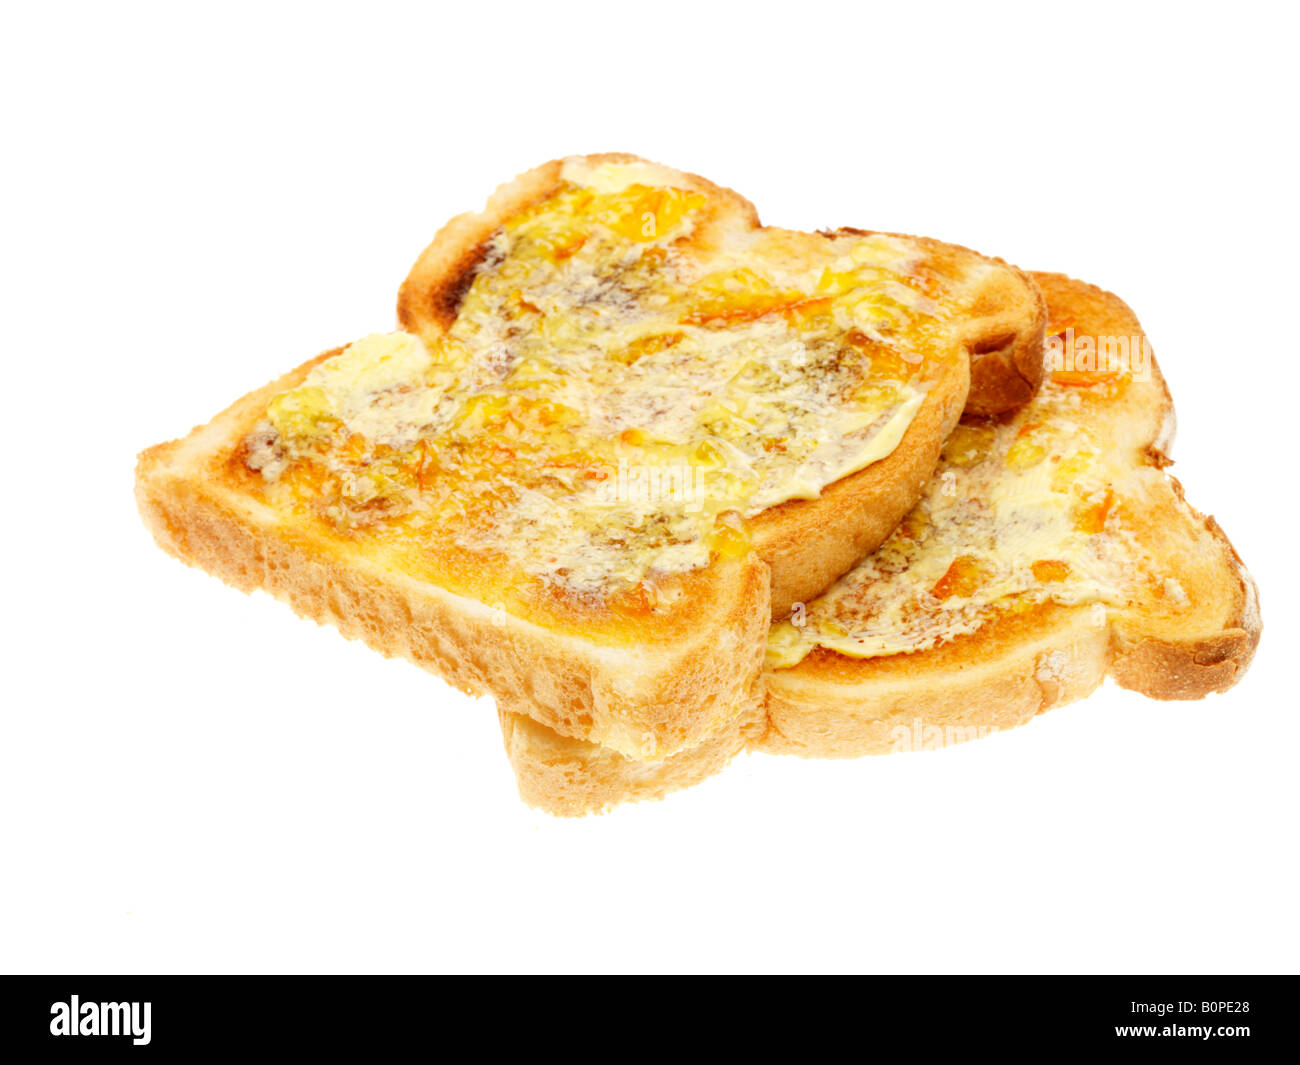 Buttered Toast With Marmalade Stock Photo